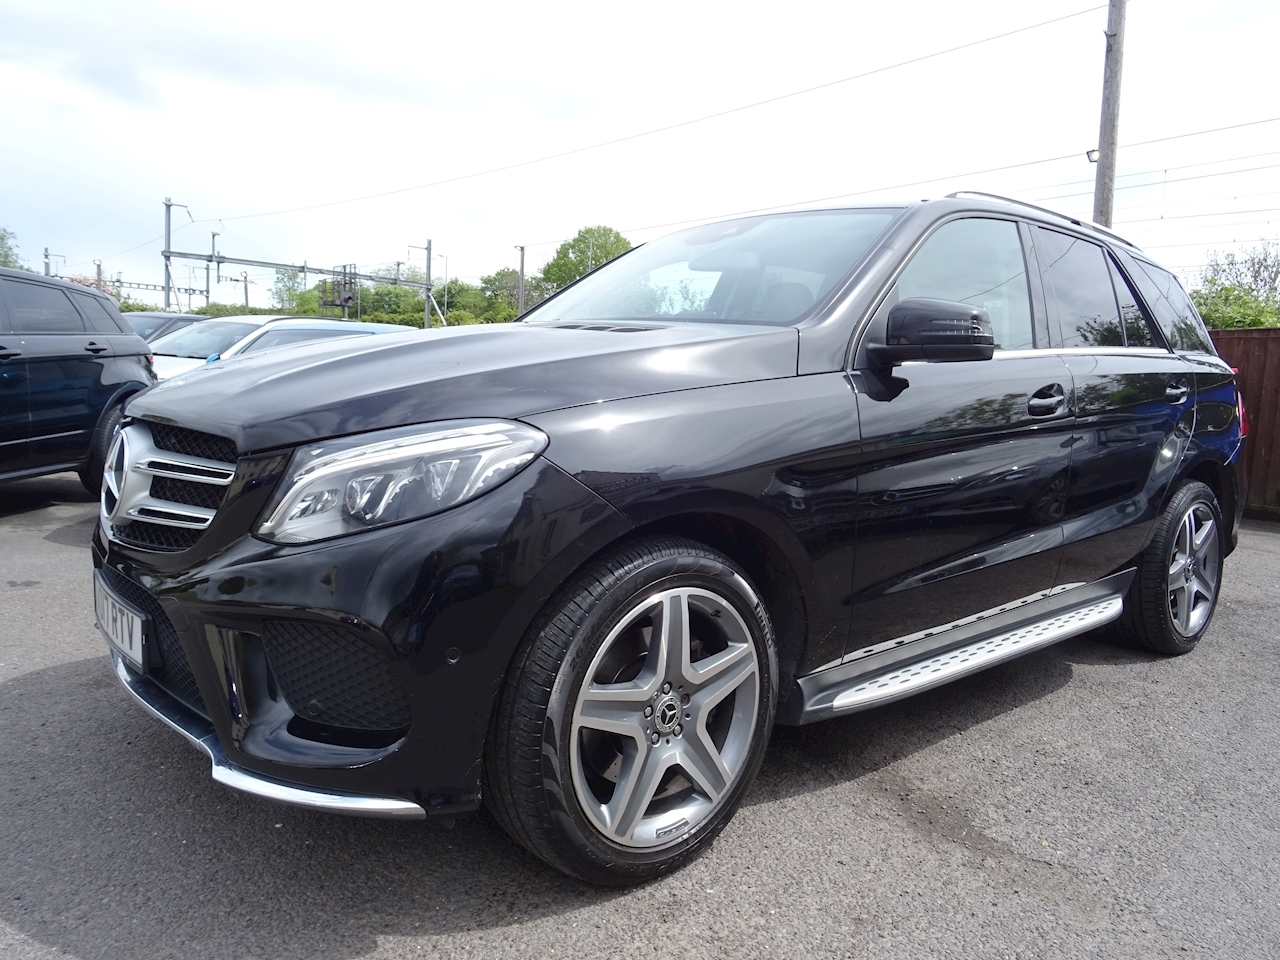 2.1 GLE250d AMG Line SUV 5dr Diesel G-Tronic 4MATIC (s/s) (204 ps)